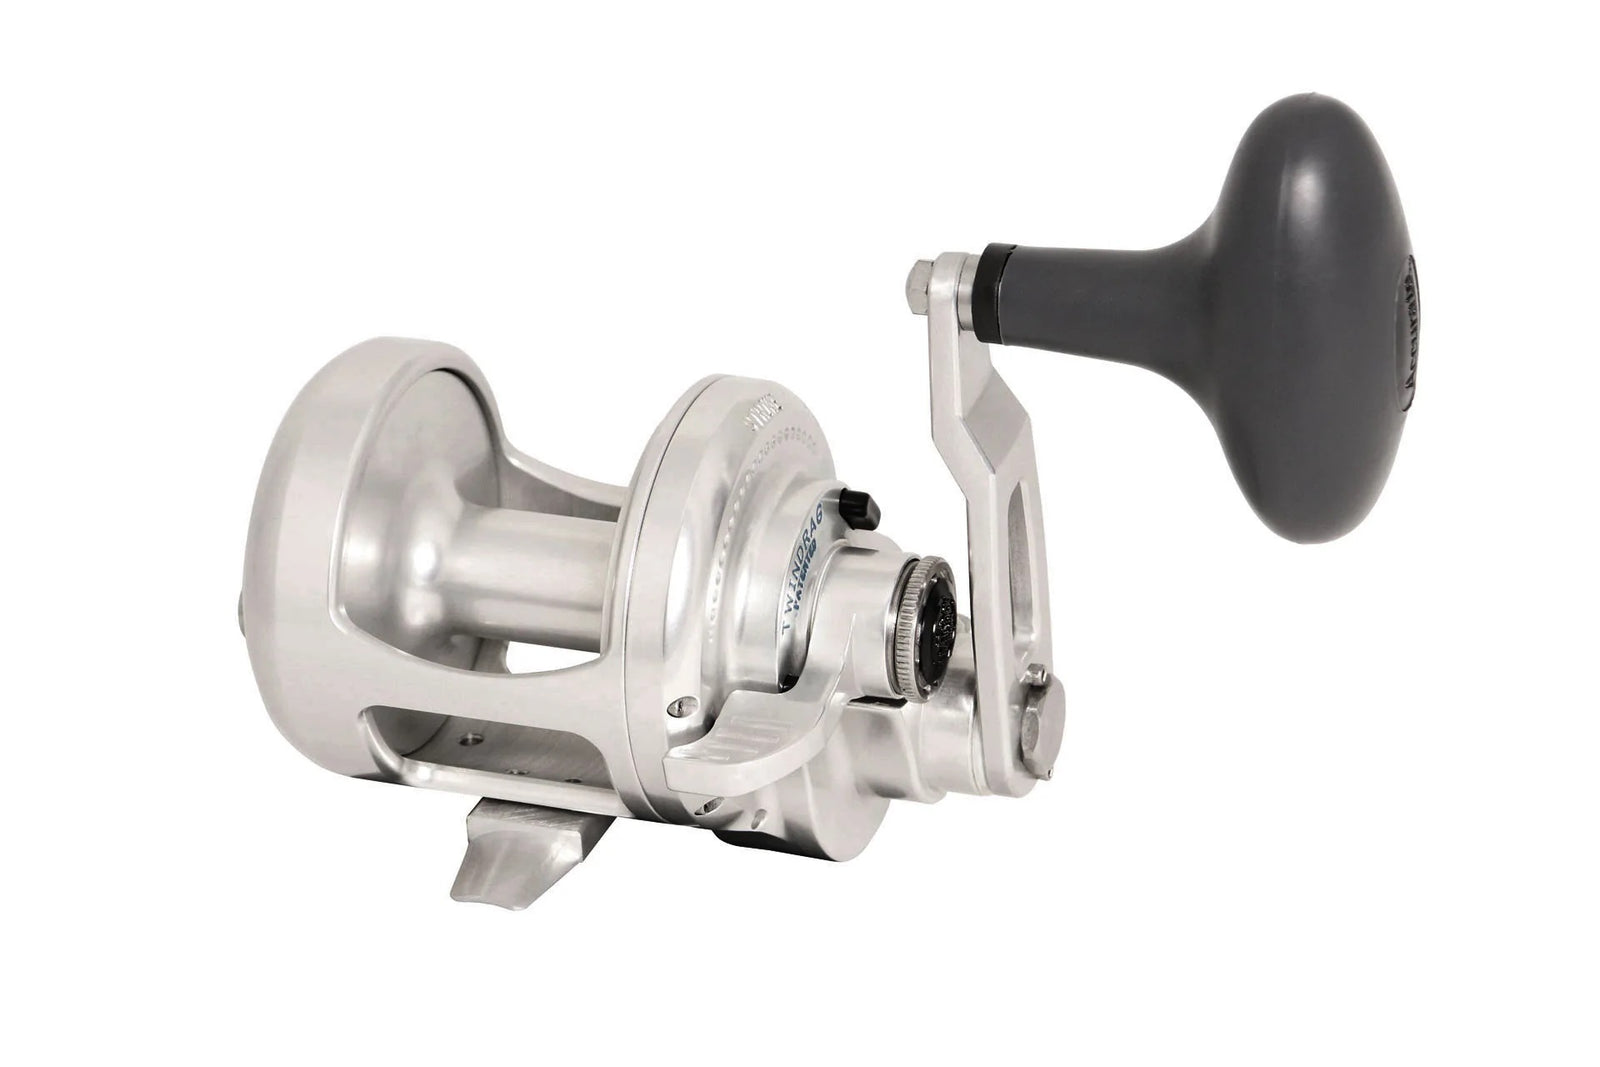 Fishing Reels For Sale - Shop for Spin, Overhead, Baitcast & more Page 9